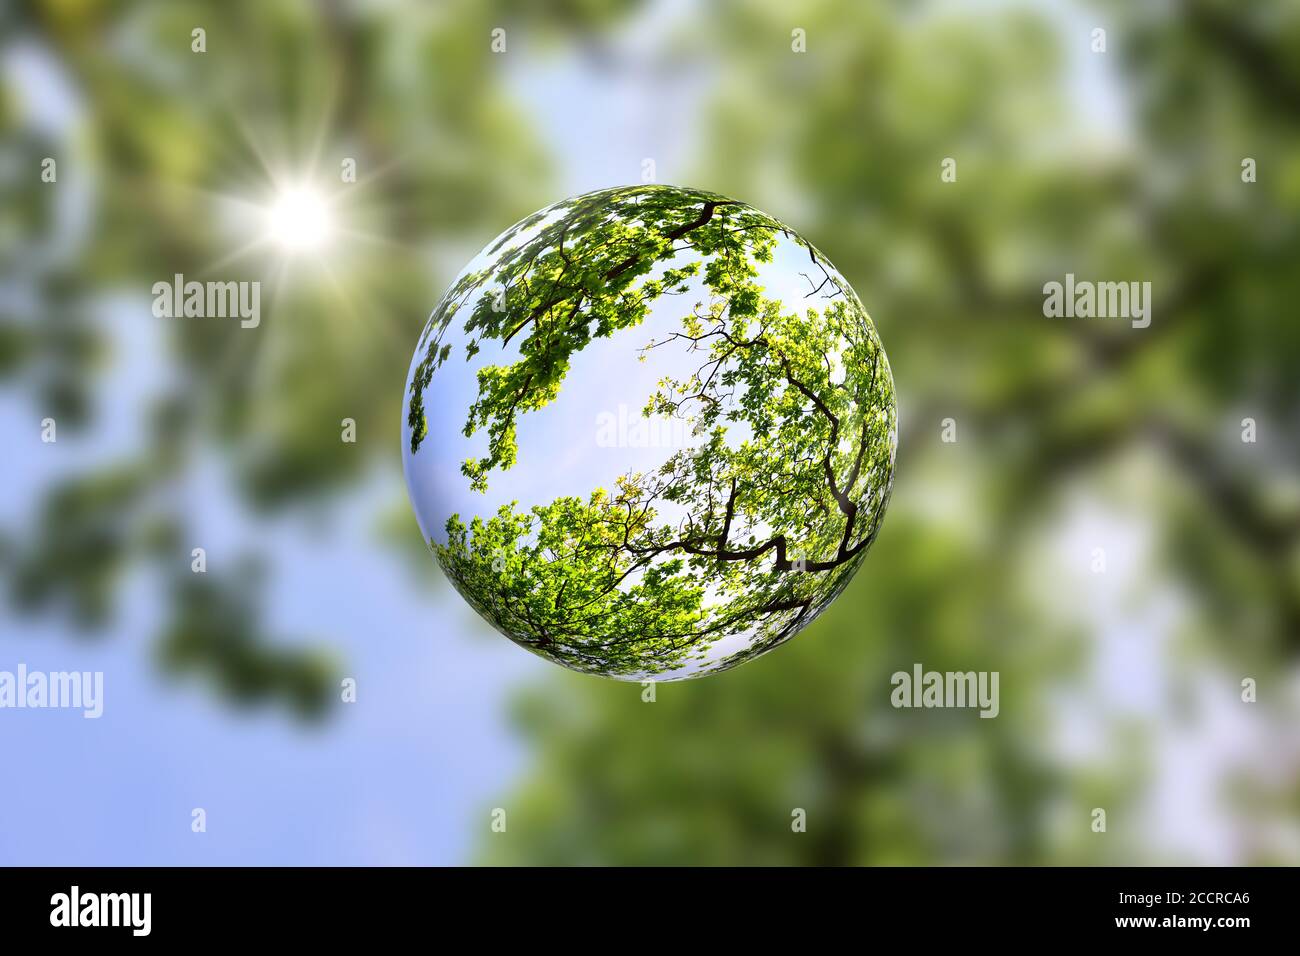 Canopy of trees inside a glass ball with the sun shining through the green foliage. Go green, pro nature concept with copy space. Stock Photo